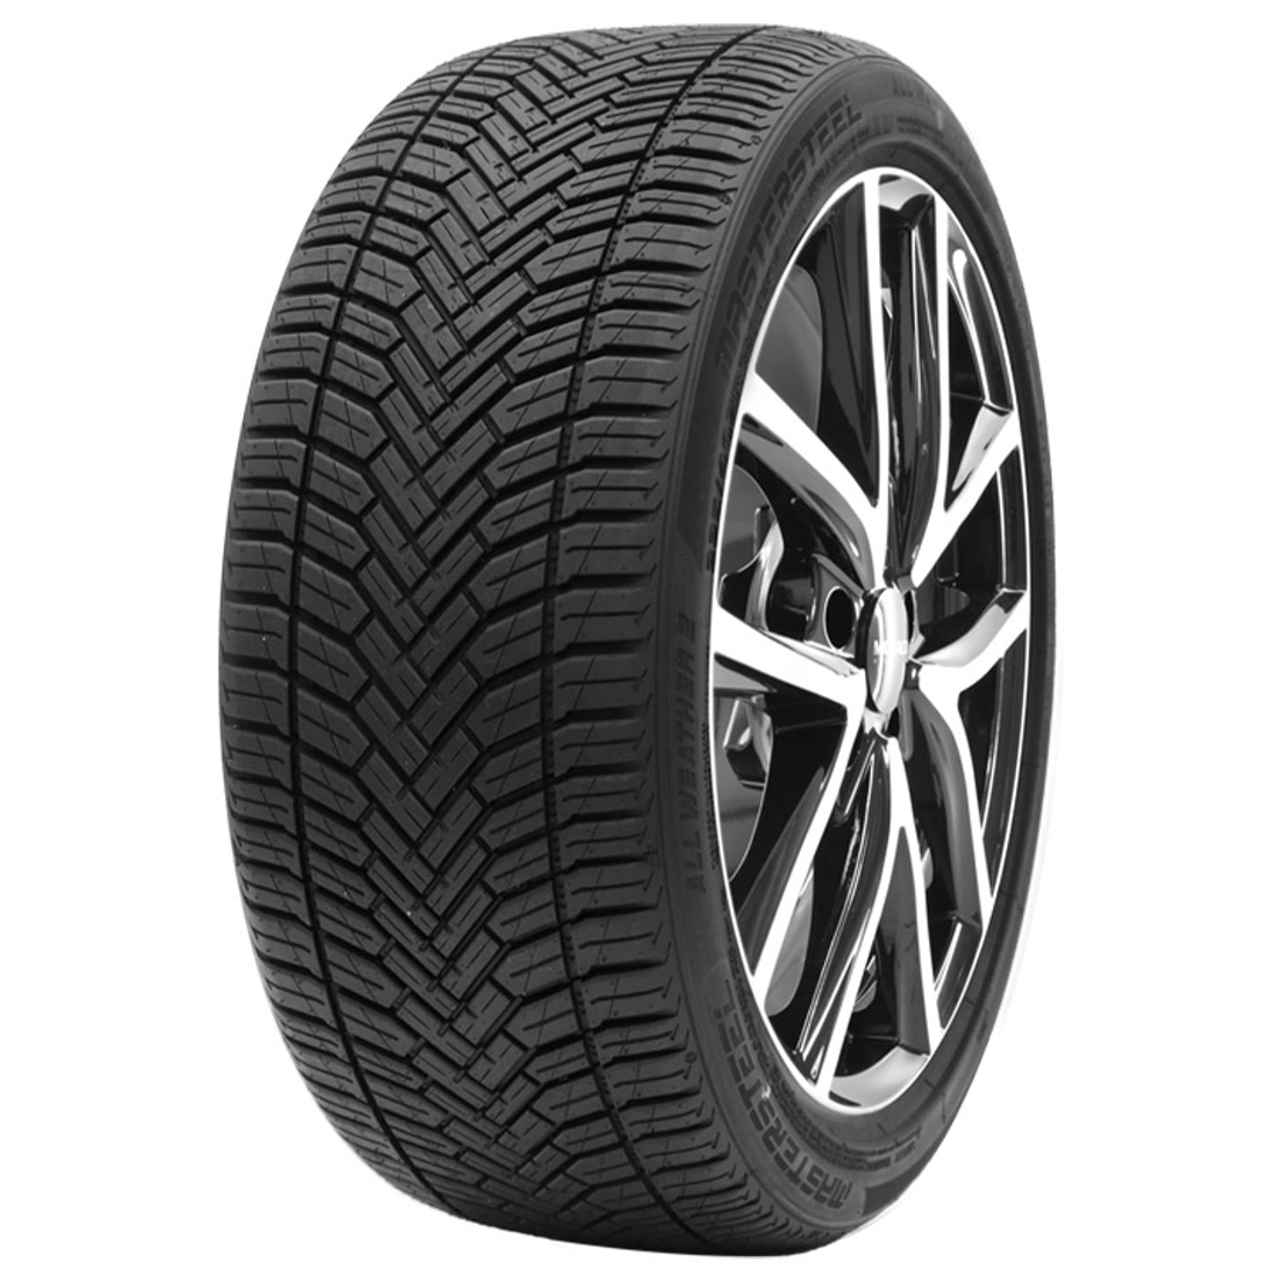 MASTERSTEEL ALL WEATHER 2 175/65R14 82T BSW